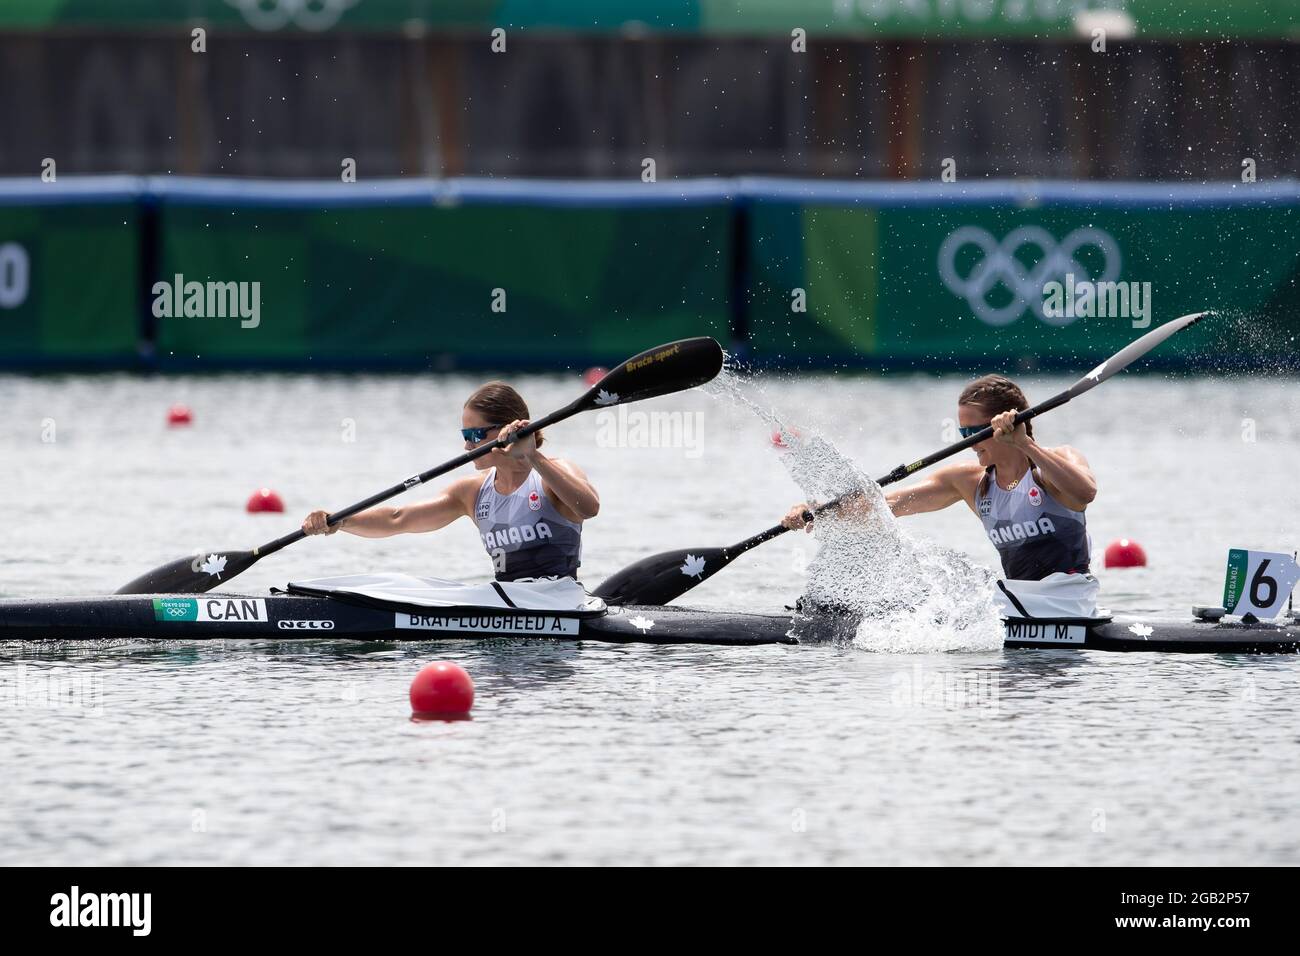 Tokyo, Japan. August 02, 2021: Alanna Bray-Lougheed (49) and Madeline Schmidt (52) of Canada in Women's Kayak Double 500m race during the Canoe Sprint Heats at Sea Forest Waterway in Tokyo, Japan. Daniel Lea/CSM} Credit: Cal Sport Media/Alamy Live News Stock Photo